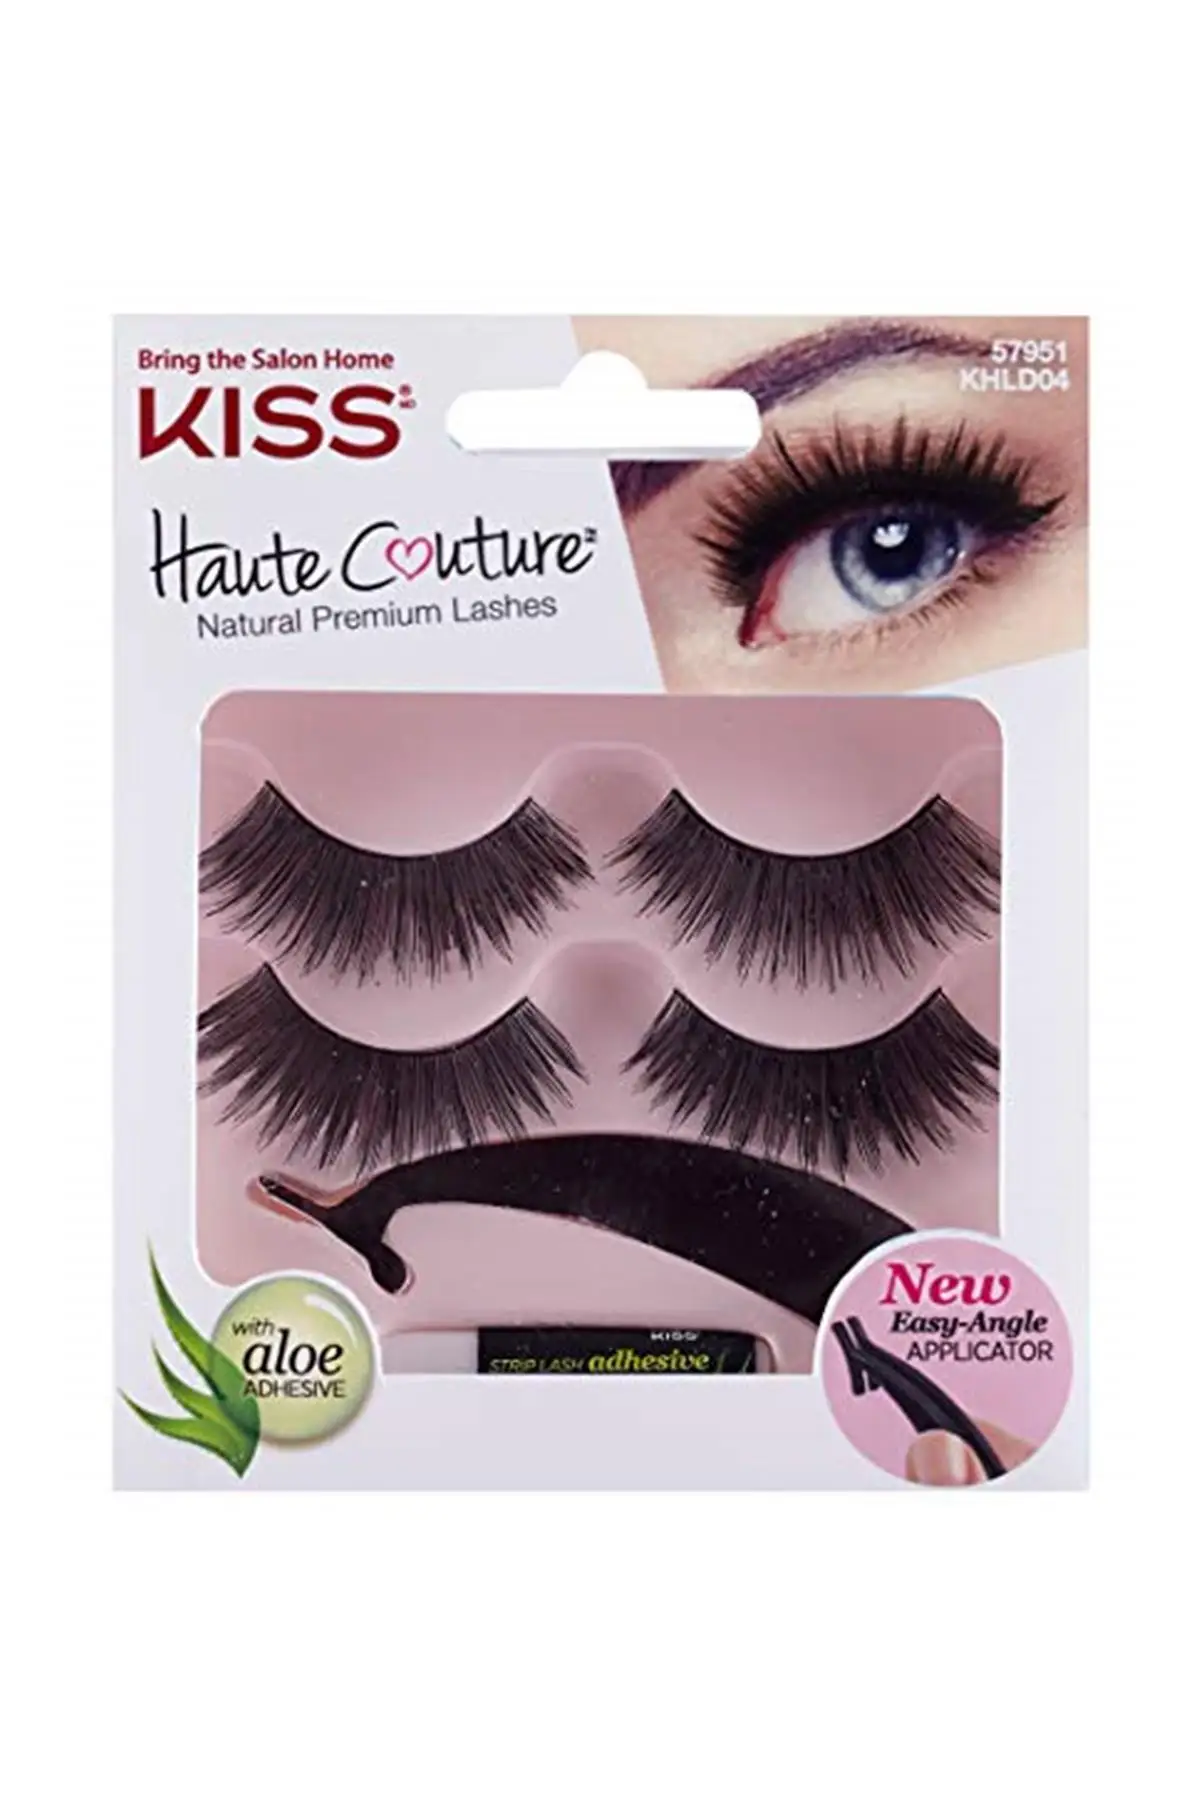 

Brand: Kiss Khld04Gt Haute Couture Duo Pack Lashes-Coy 1 Package (1x40g) category: False Eyelashes